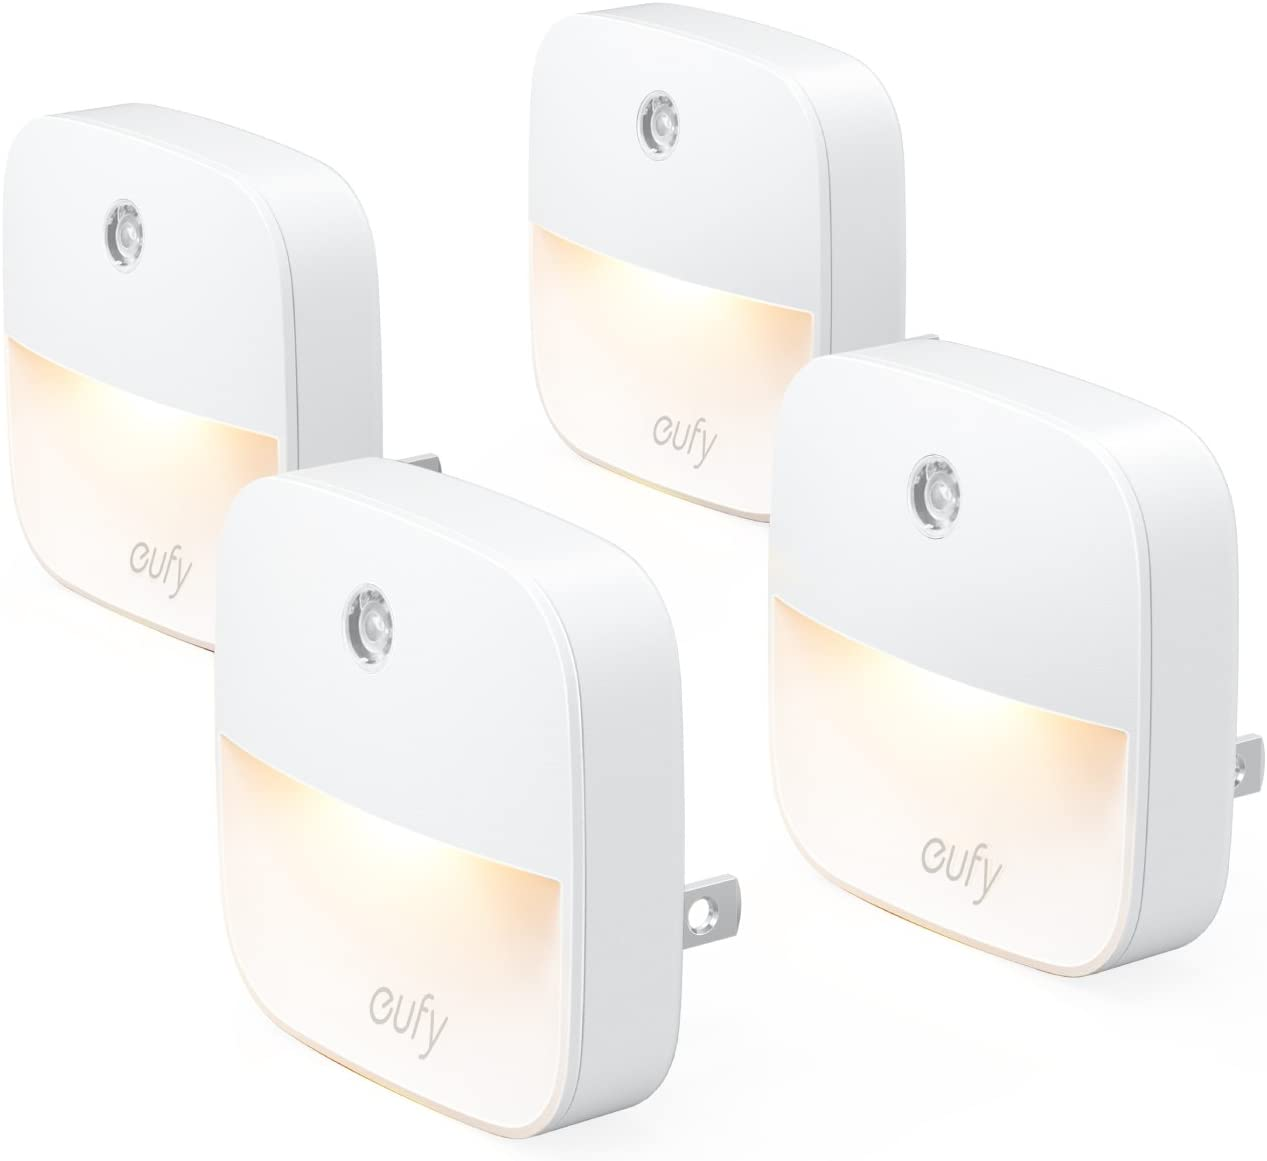 eufy by Anker, Lumi Plug-in Night Light, Warm White LED, Dusk-to-Dawn Sensor, Bedroom, Bathroom, Kitchen, Hallway, Stairs, Energy Efficient, Compact, Light 4-Pack $10.99